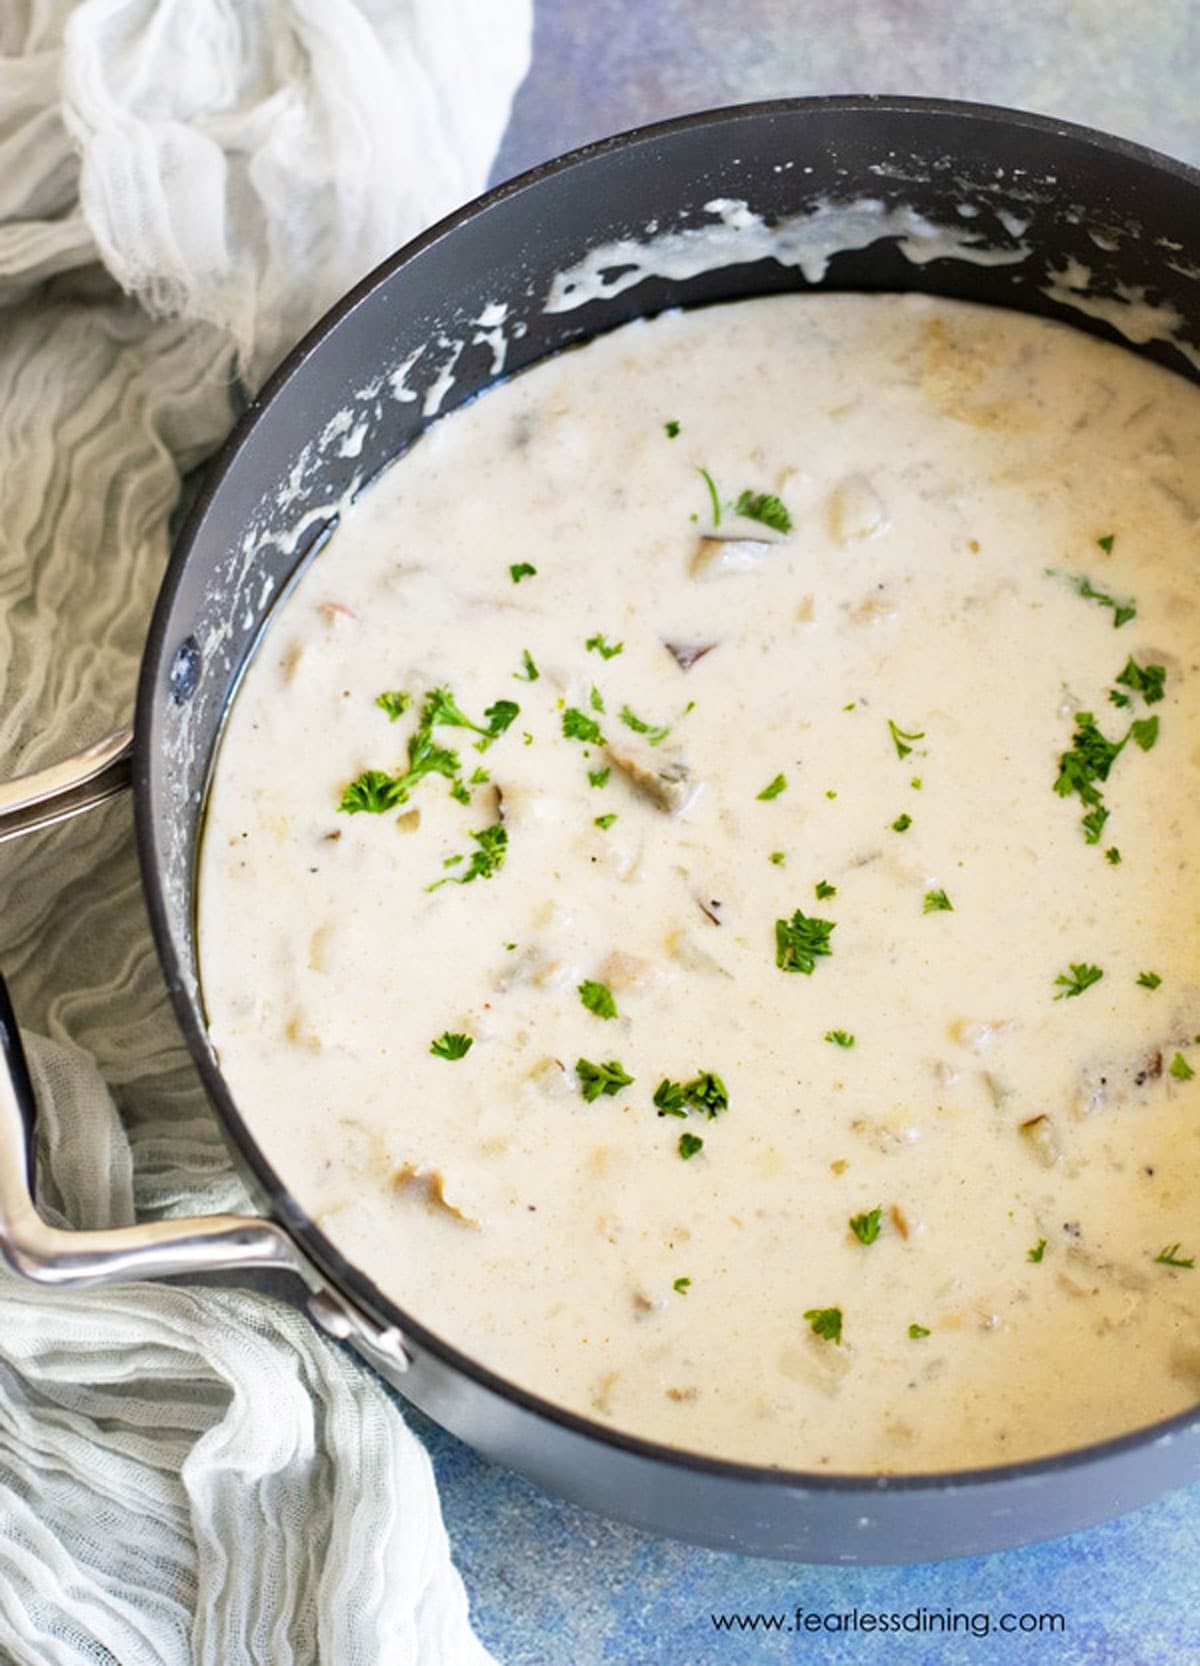 A big pot of cooked clam chowder. It is garnished with fresh chopped parsley.